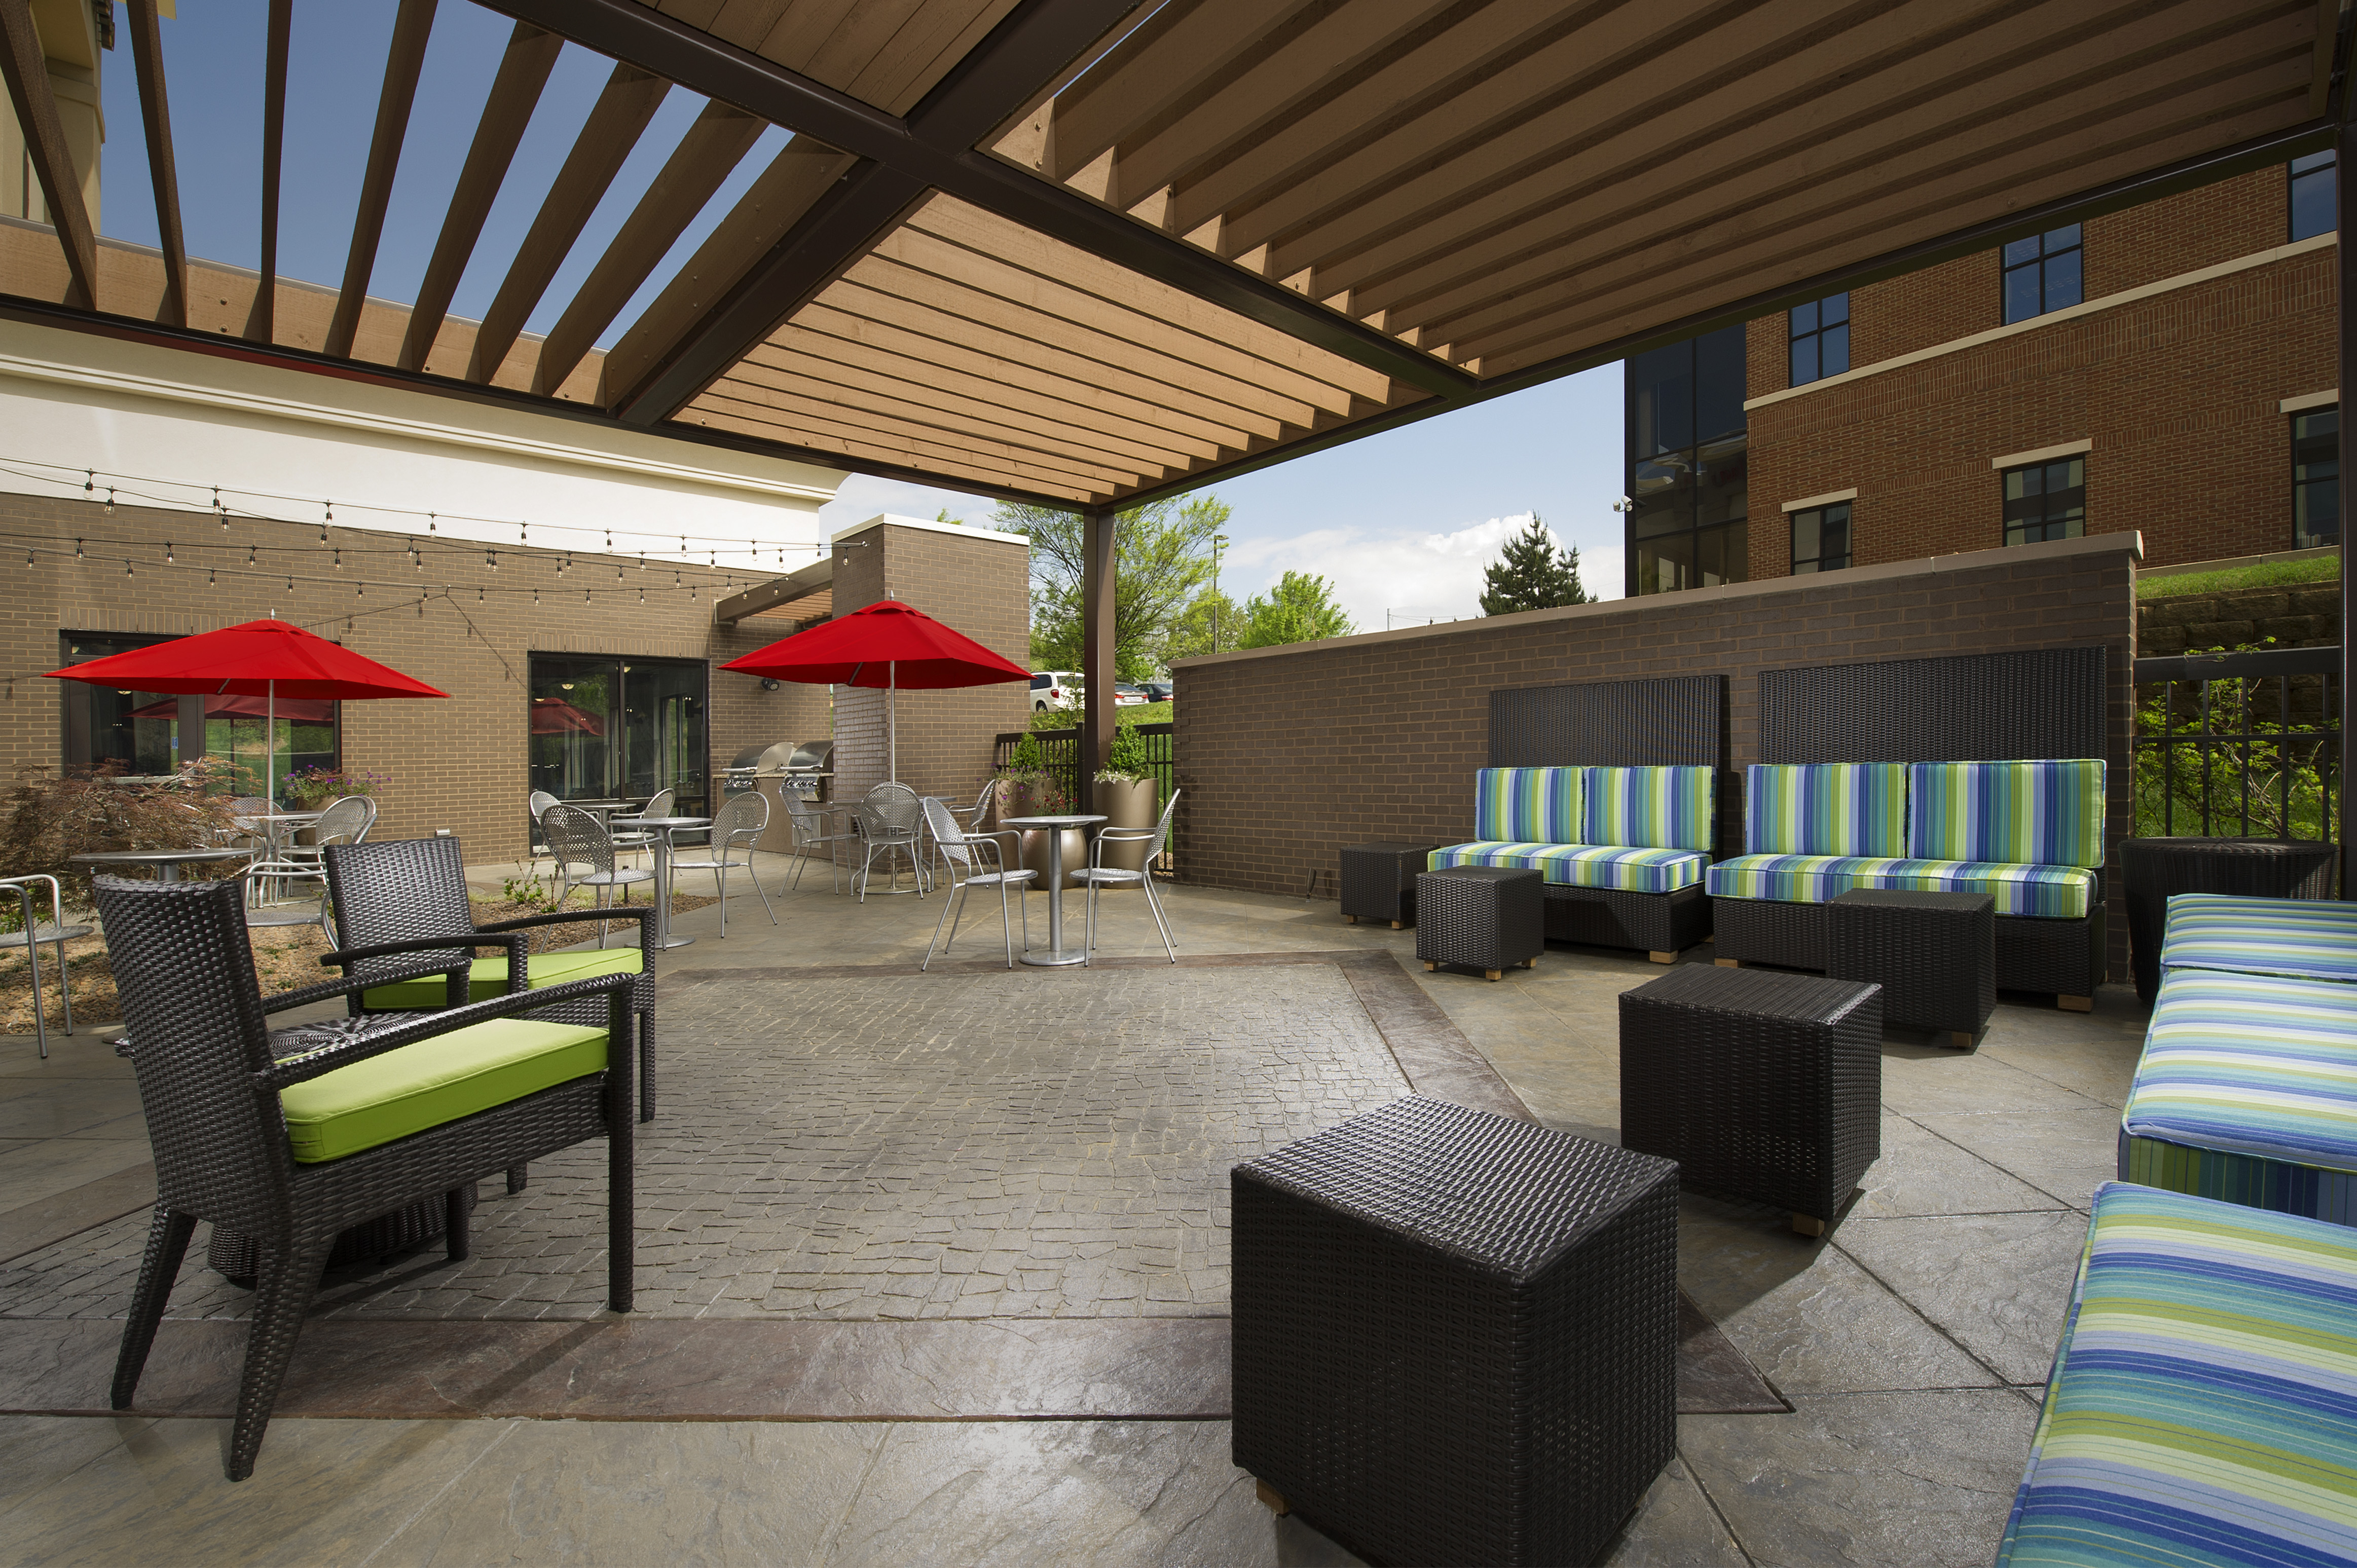 Outdoor Patio Seating Area with Armchairs, Tables and Umbrellas